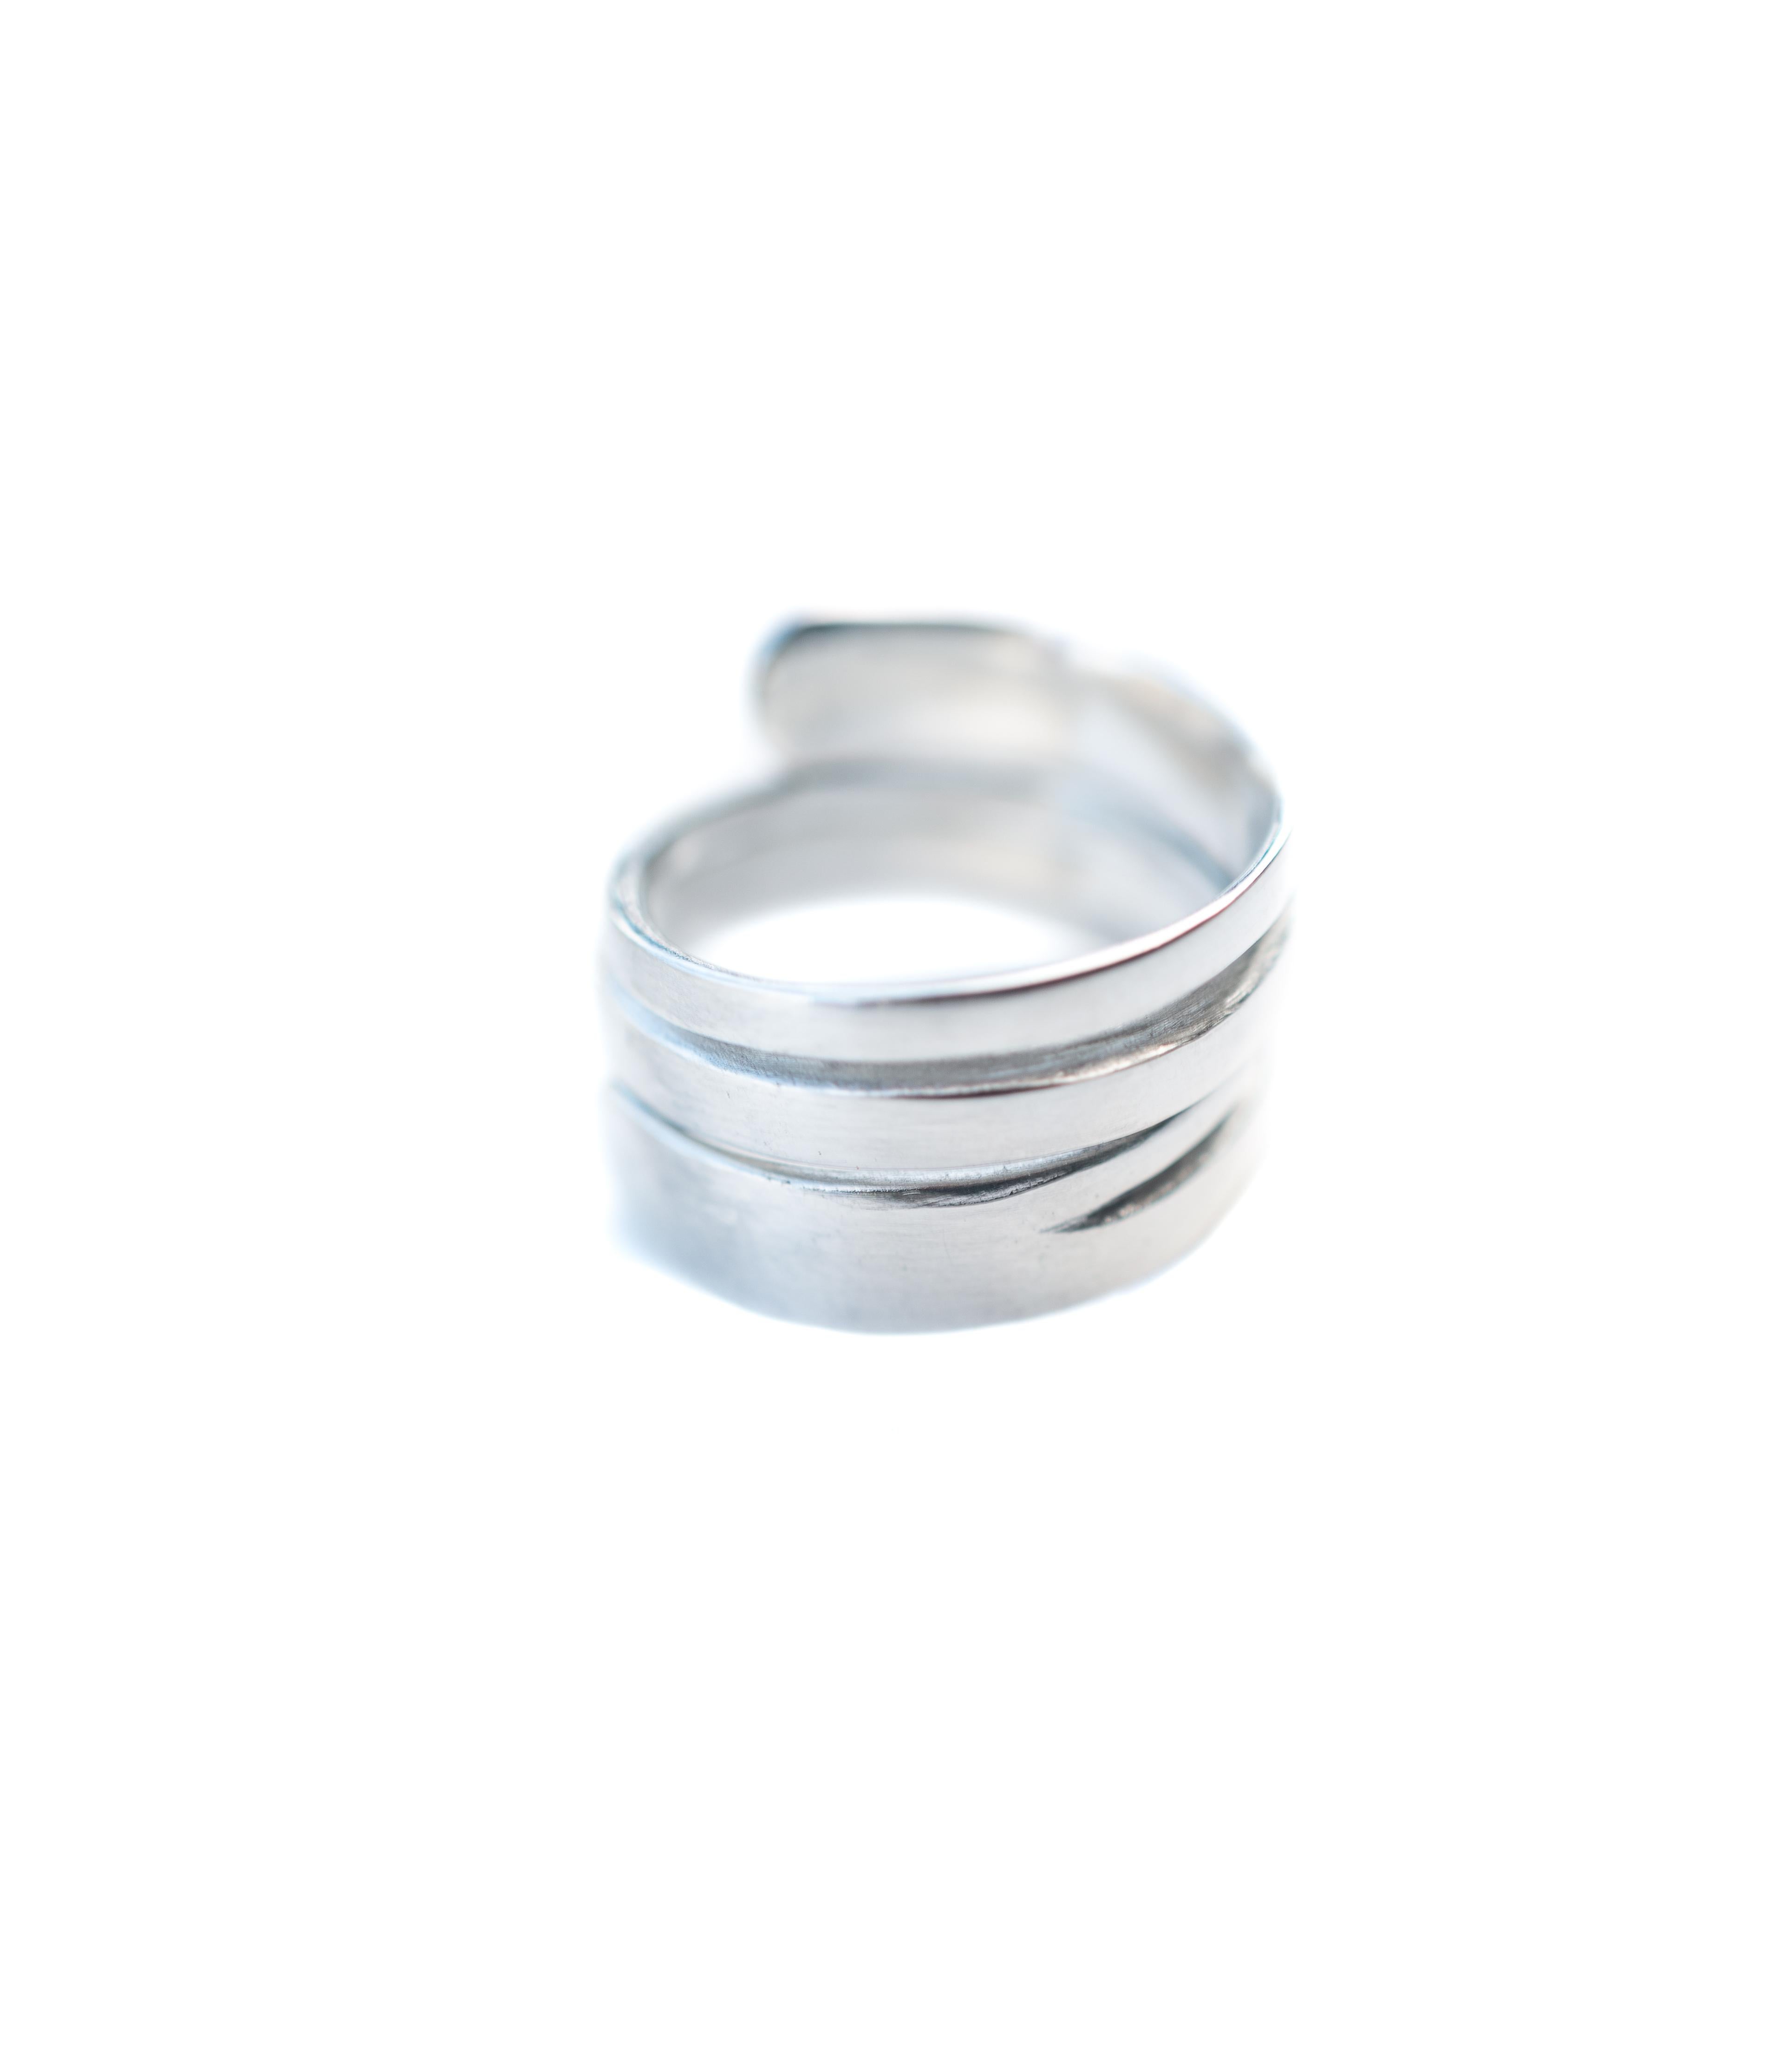 The Atlantic ring is inspired by ocean waves.  The negative spaces featured in the ring are representative of the waves slicing through the ocean surface, creating a cut- out effect.  The Atlantic ring is constructed with sterling silver using the